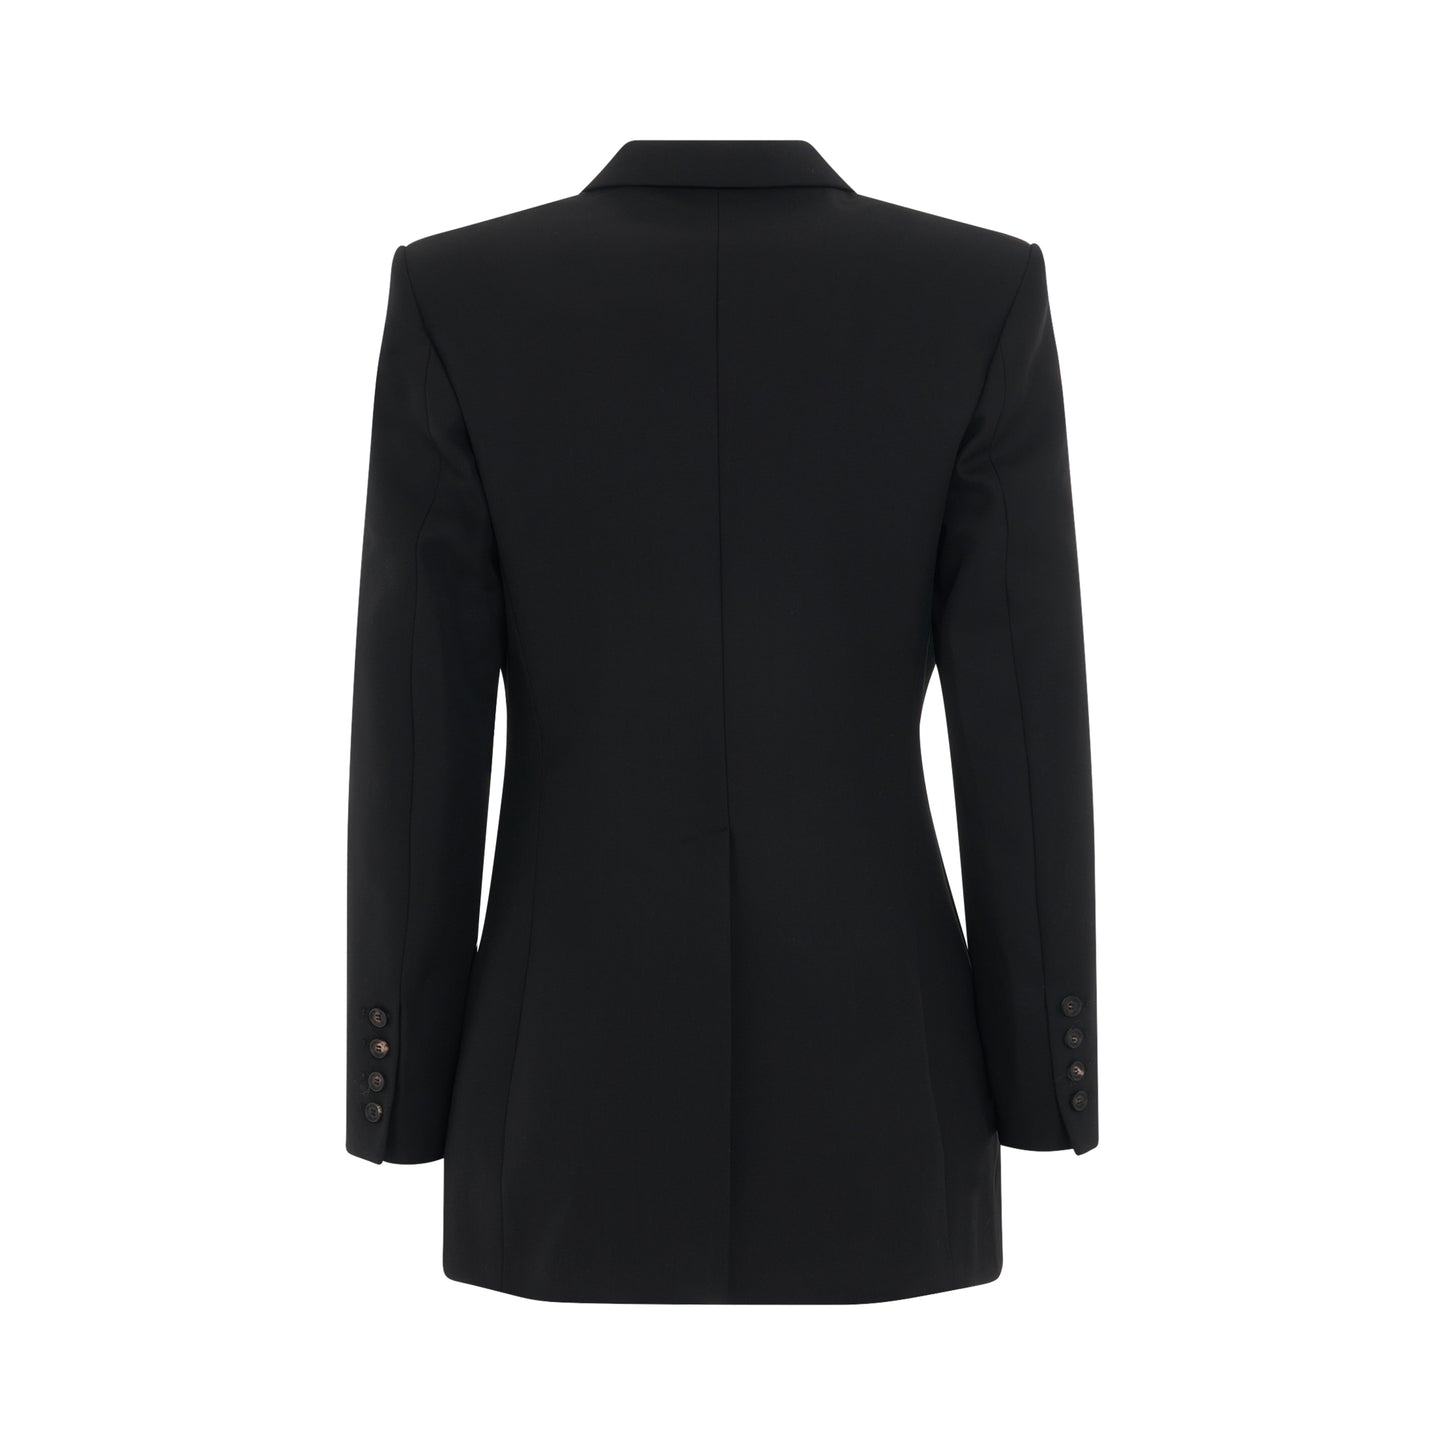 Egonic Double Breasted Jacket in Black